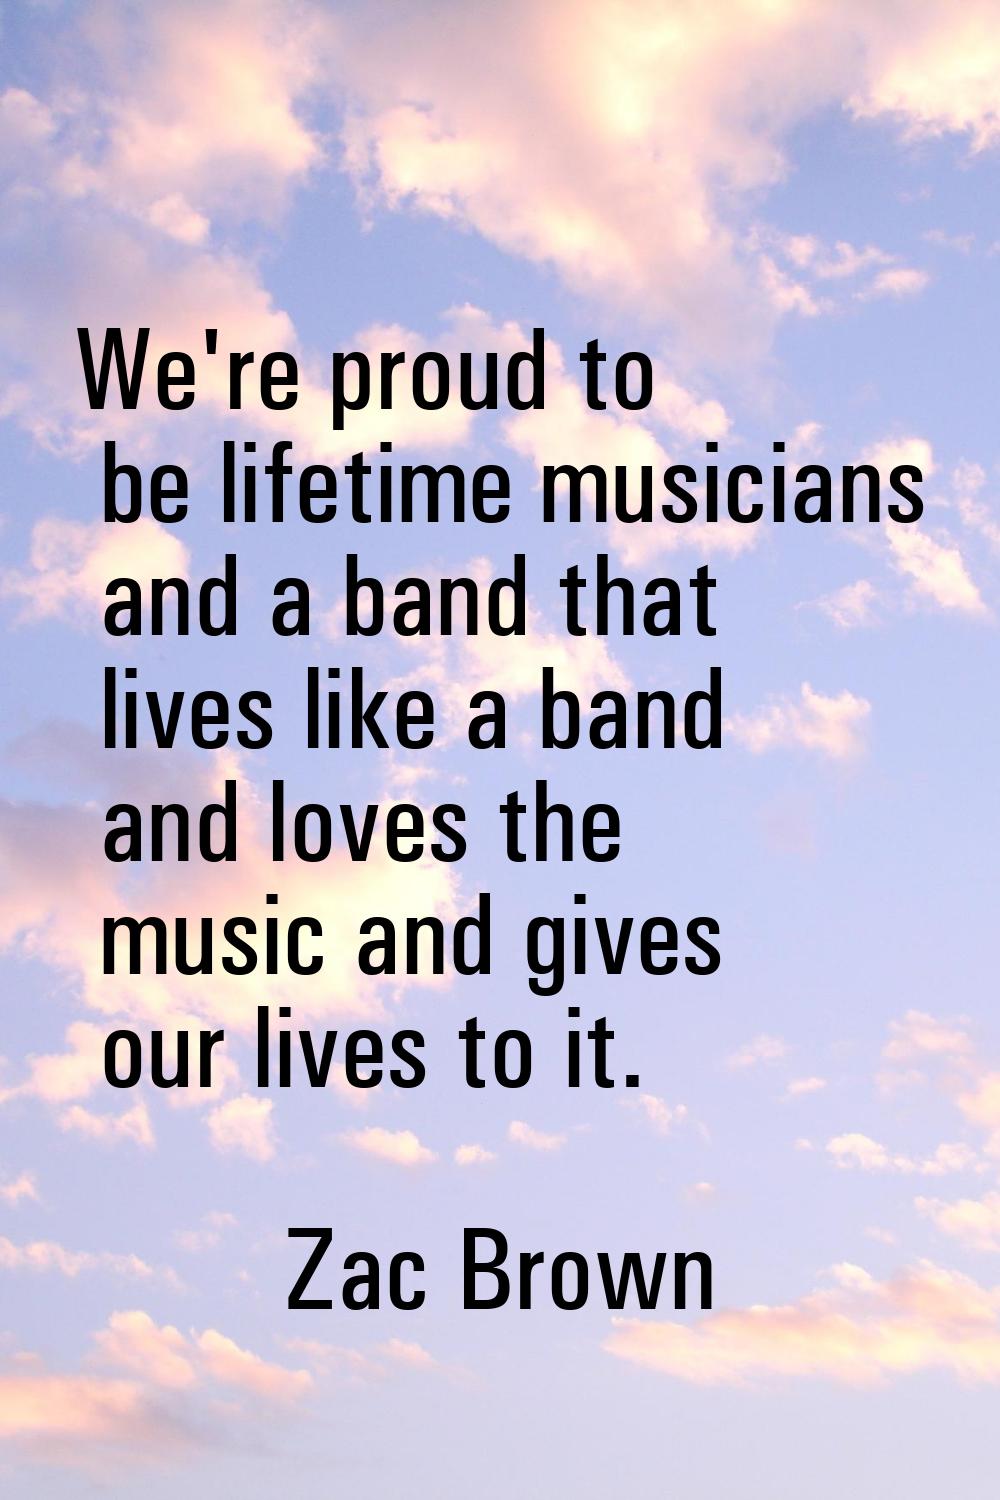 We're proud to be lifetime musicians and a band that lives like a band and loves the music and give